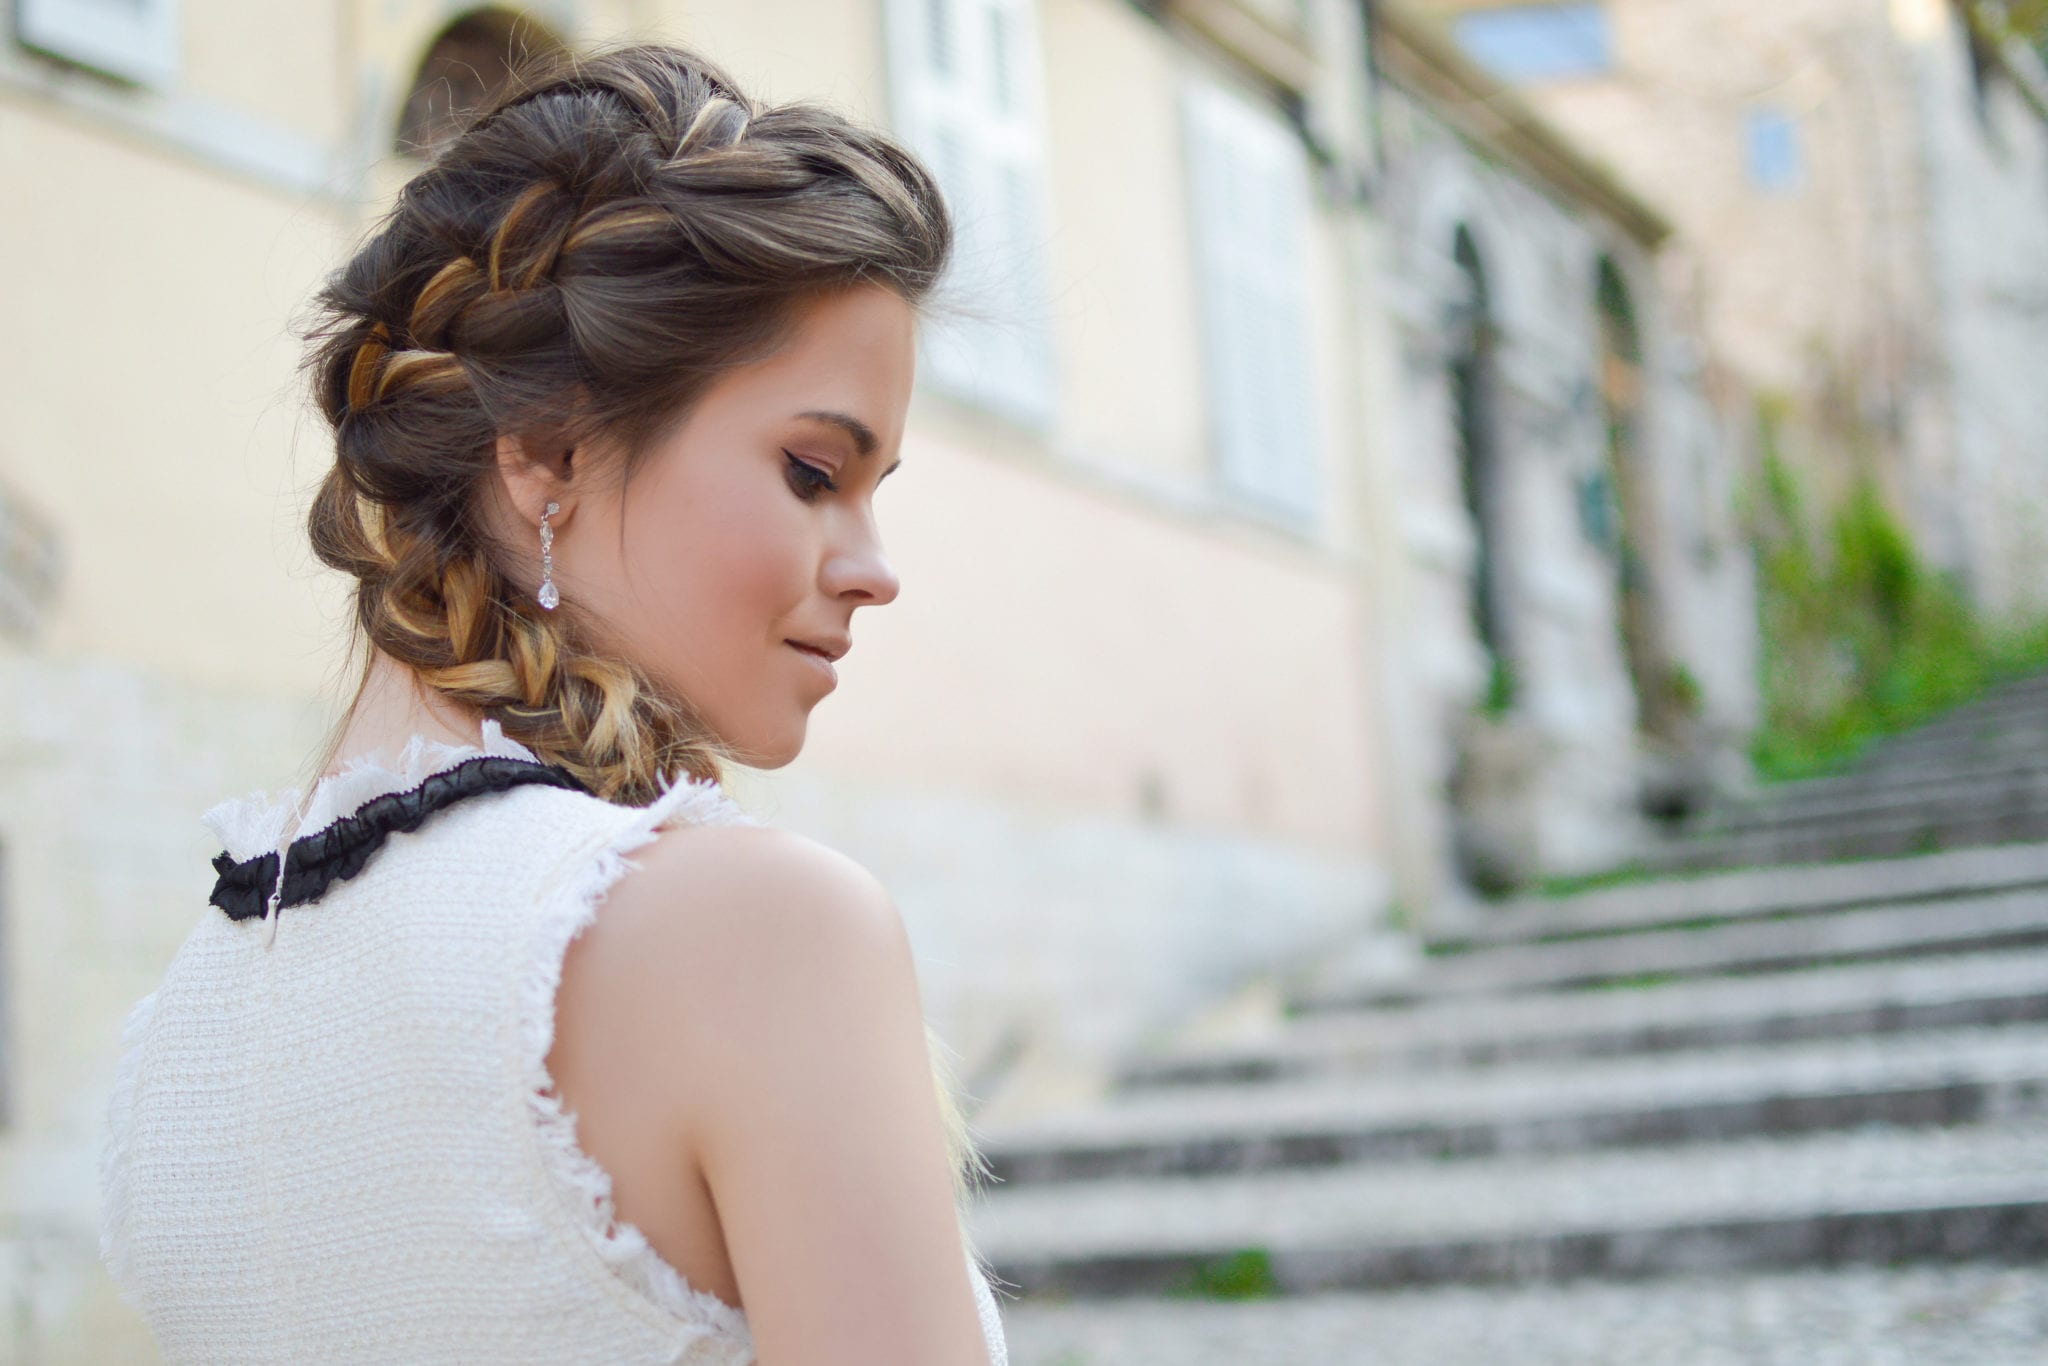 4 hairstyles to get your crowning glory off your face